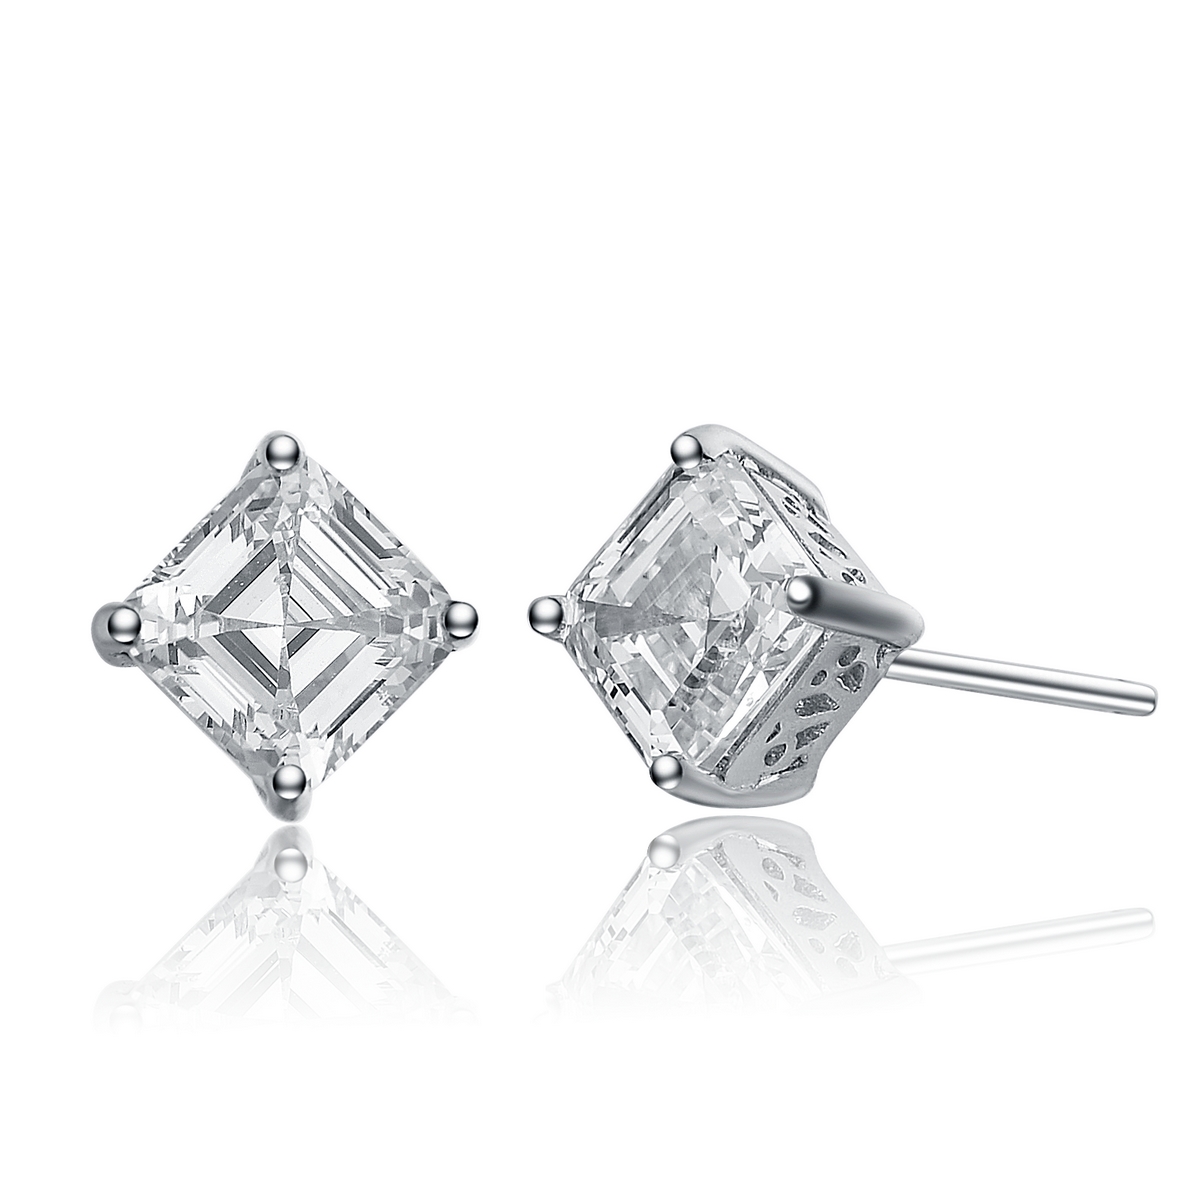 Cubic Zirconia (.925) Sterling Silver Square Stud Earrings